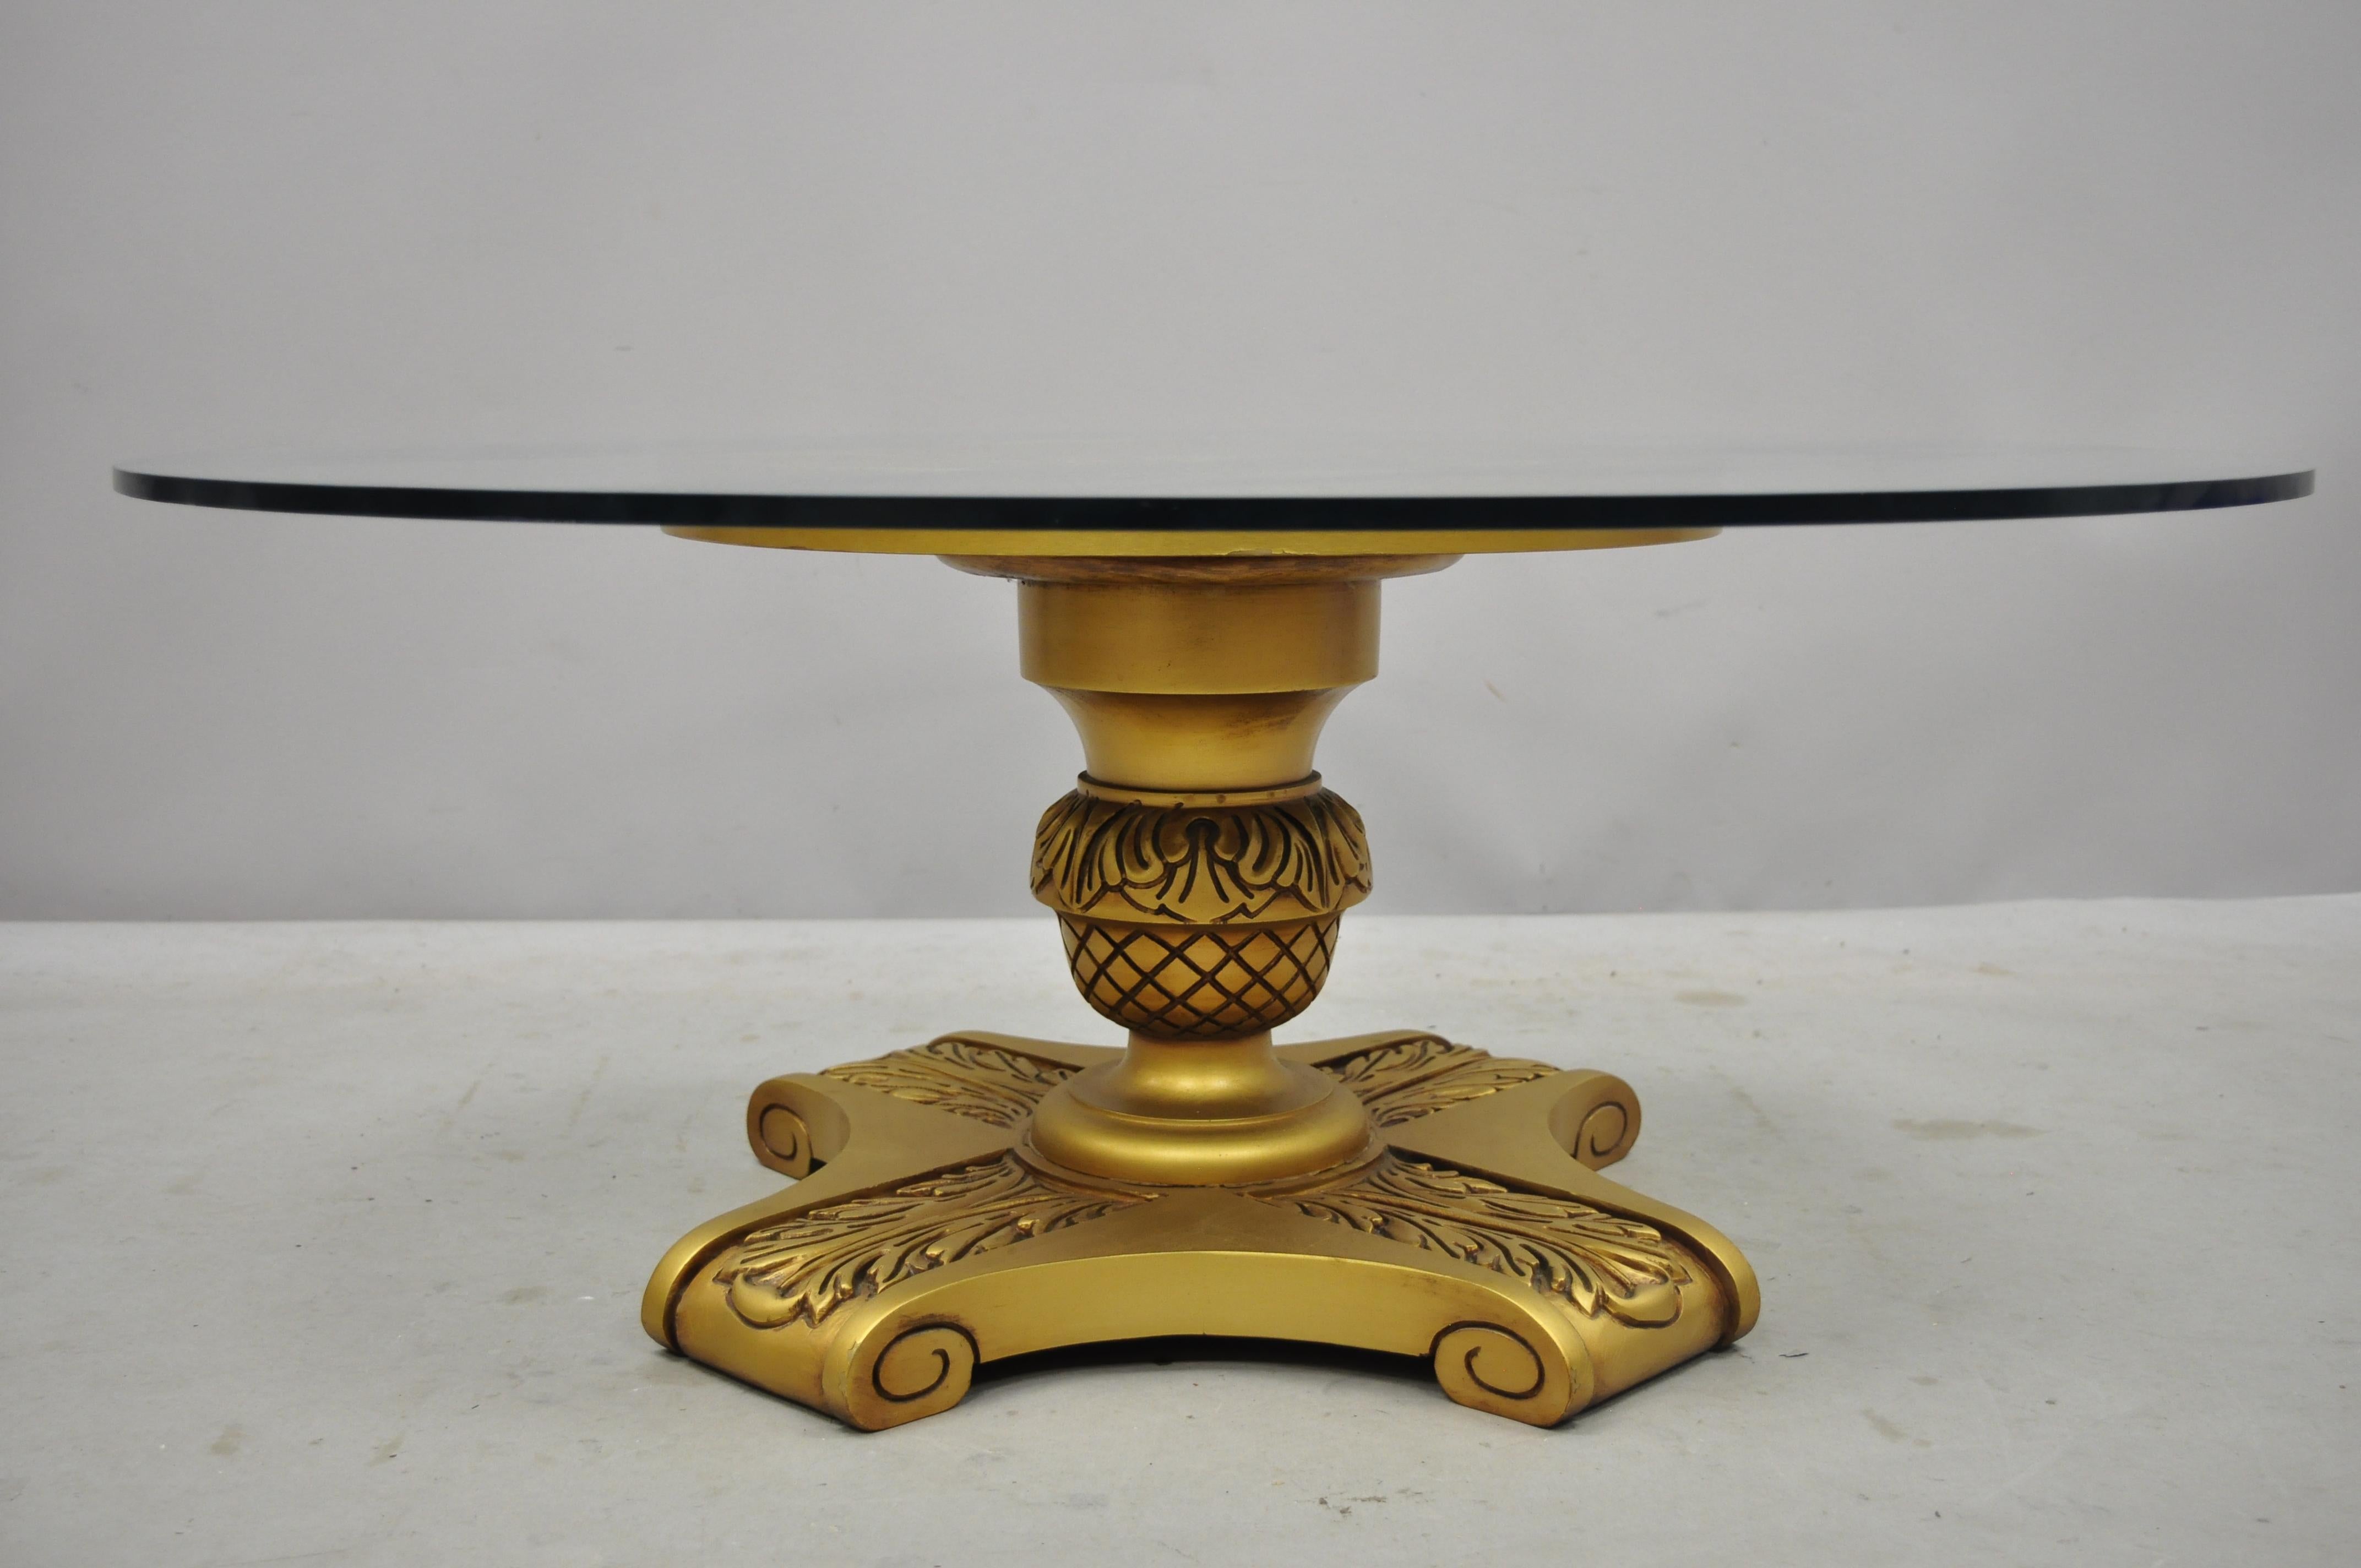 Vintage Hollywood Regency Dorothy Draper style gold pedestal base glass top coffee table. Item includes a solid wood carved pedestal base, gold gilt finish, round glass top, great style and form,
circa mid-20th century. Measurements: 15